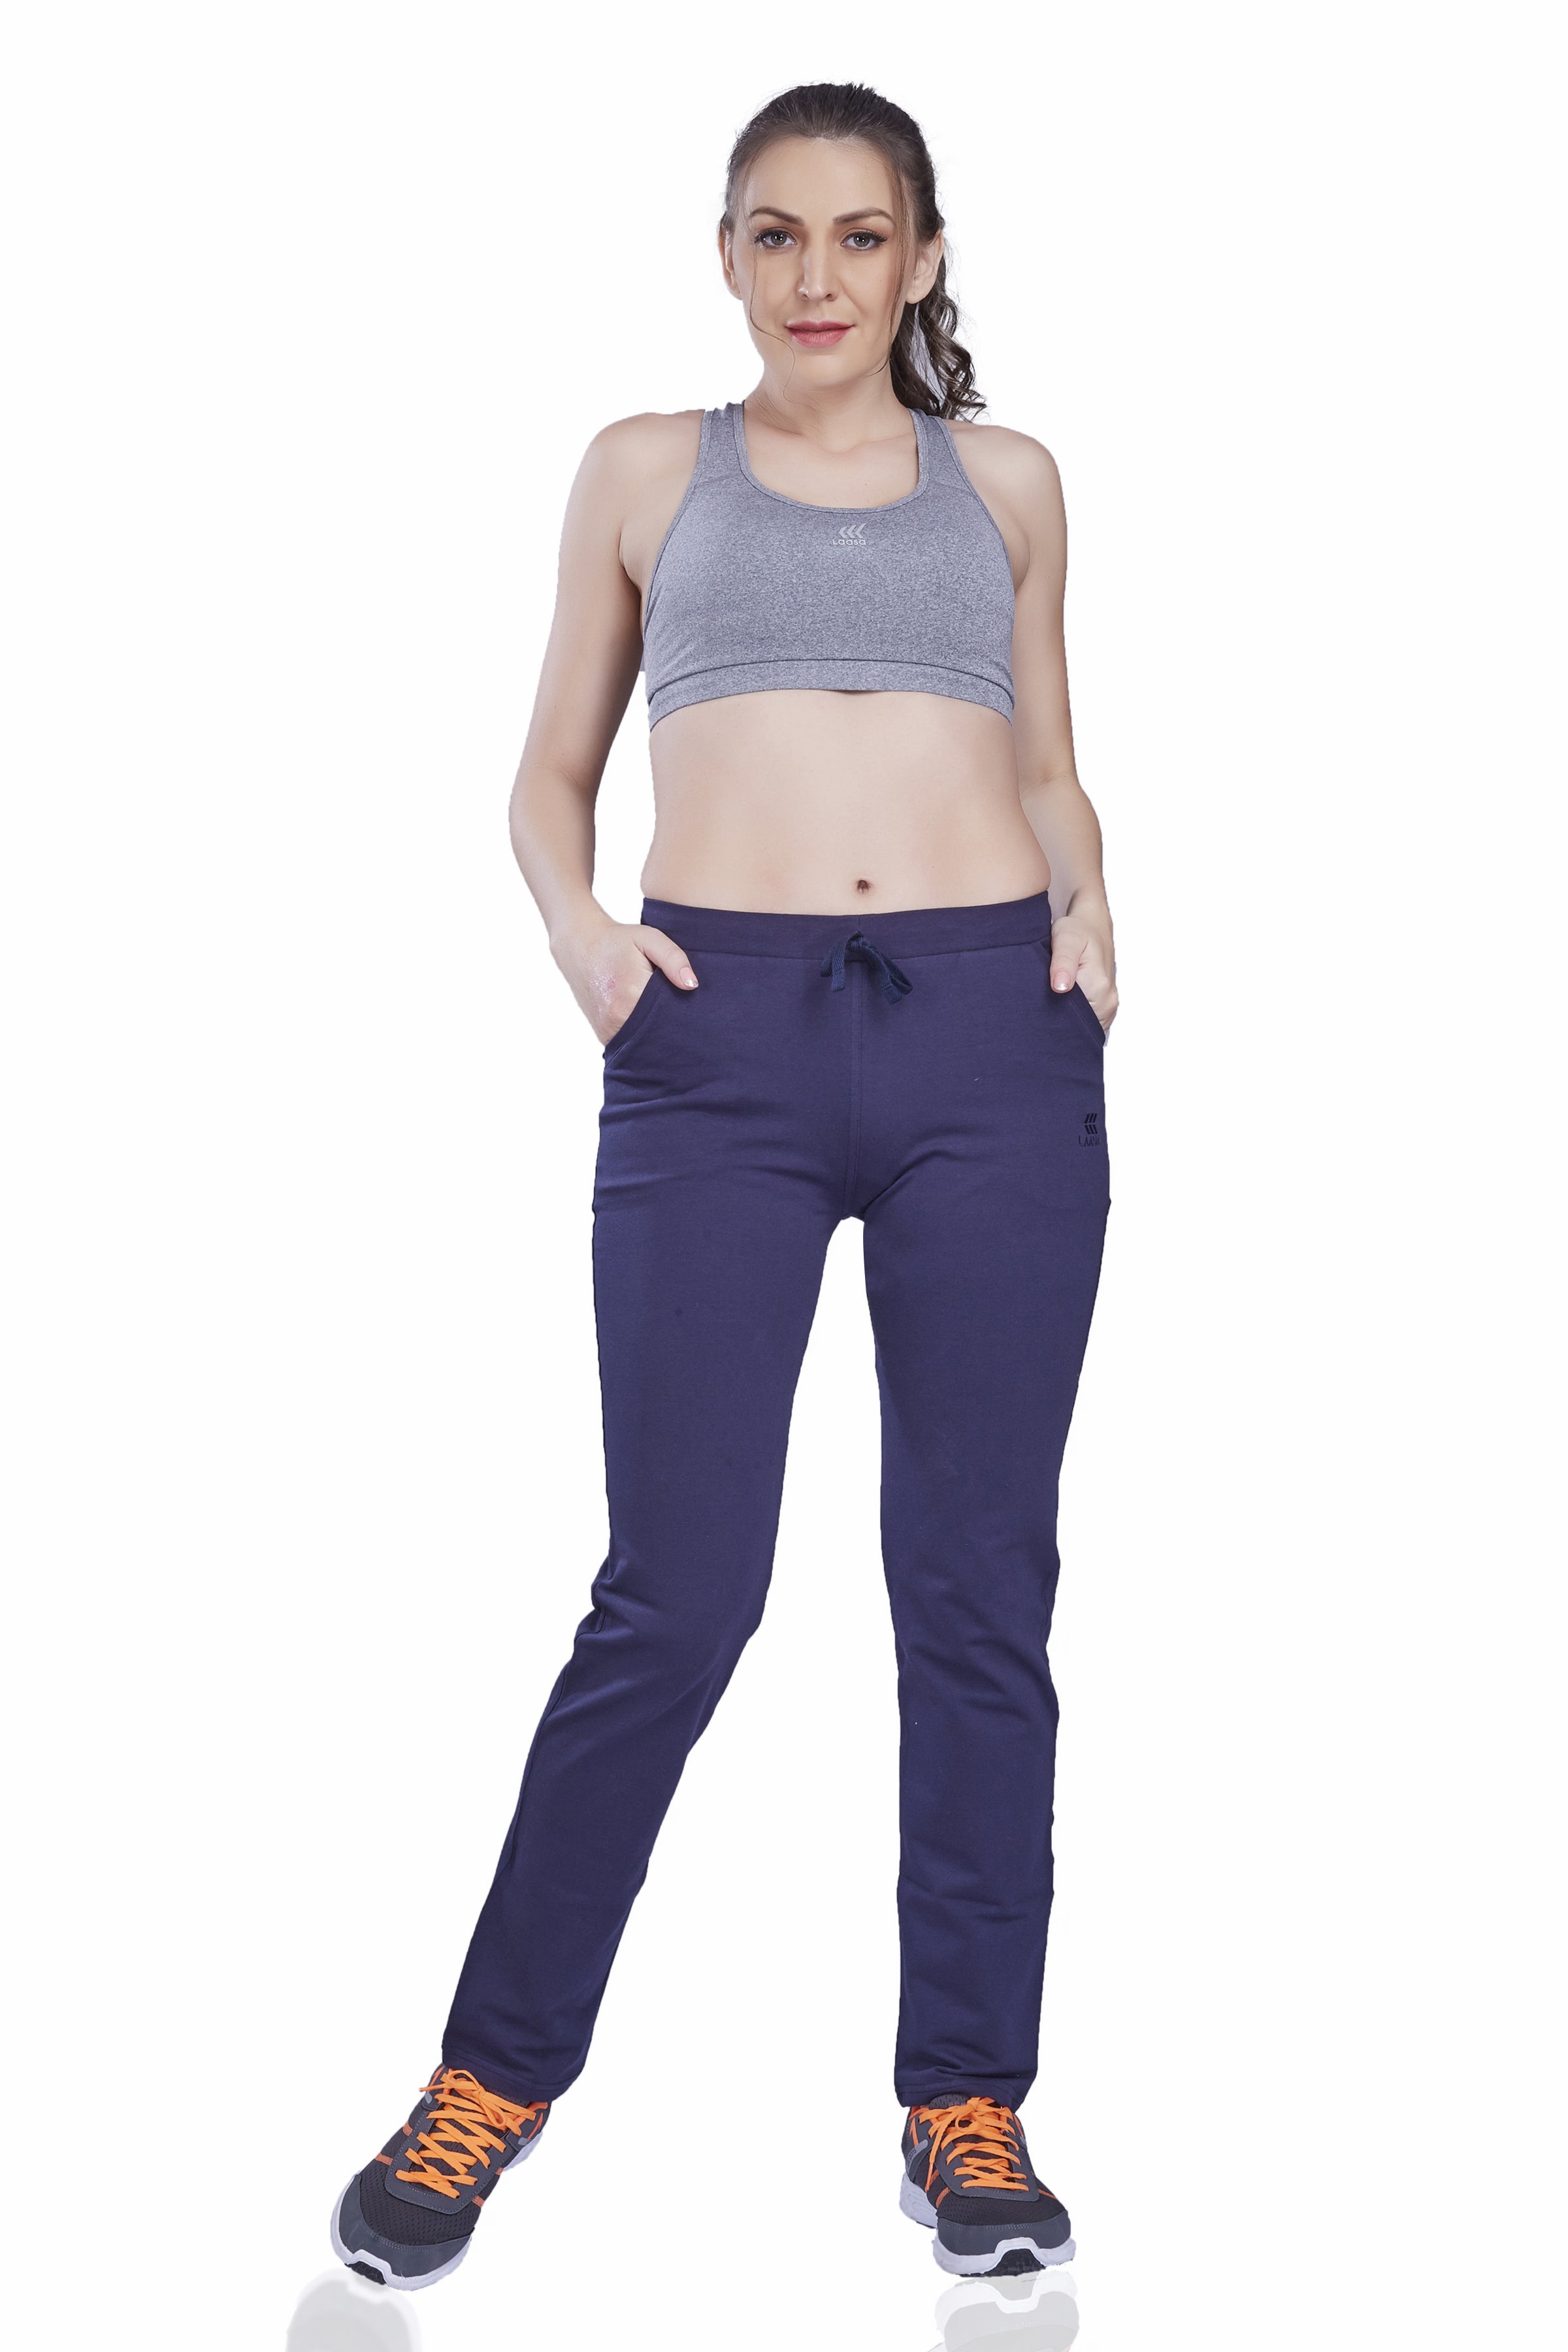 EXOLACE Striped Women Black, Pink Track Pants - Buy EXOLACE Striped Women  Black, Pink Track Pants Online at Best Prices in India | Flipkart.com